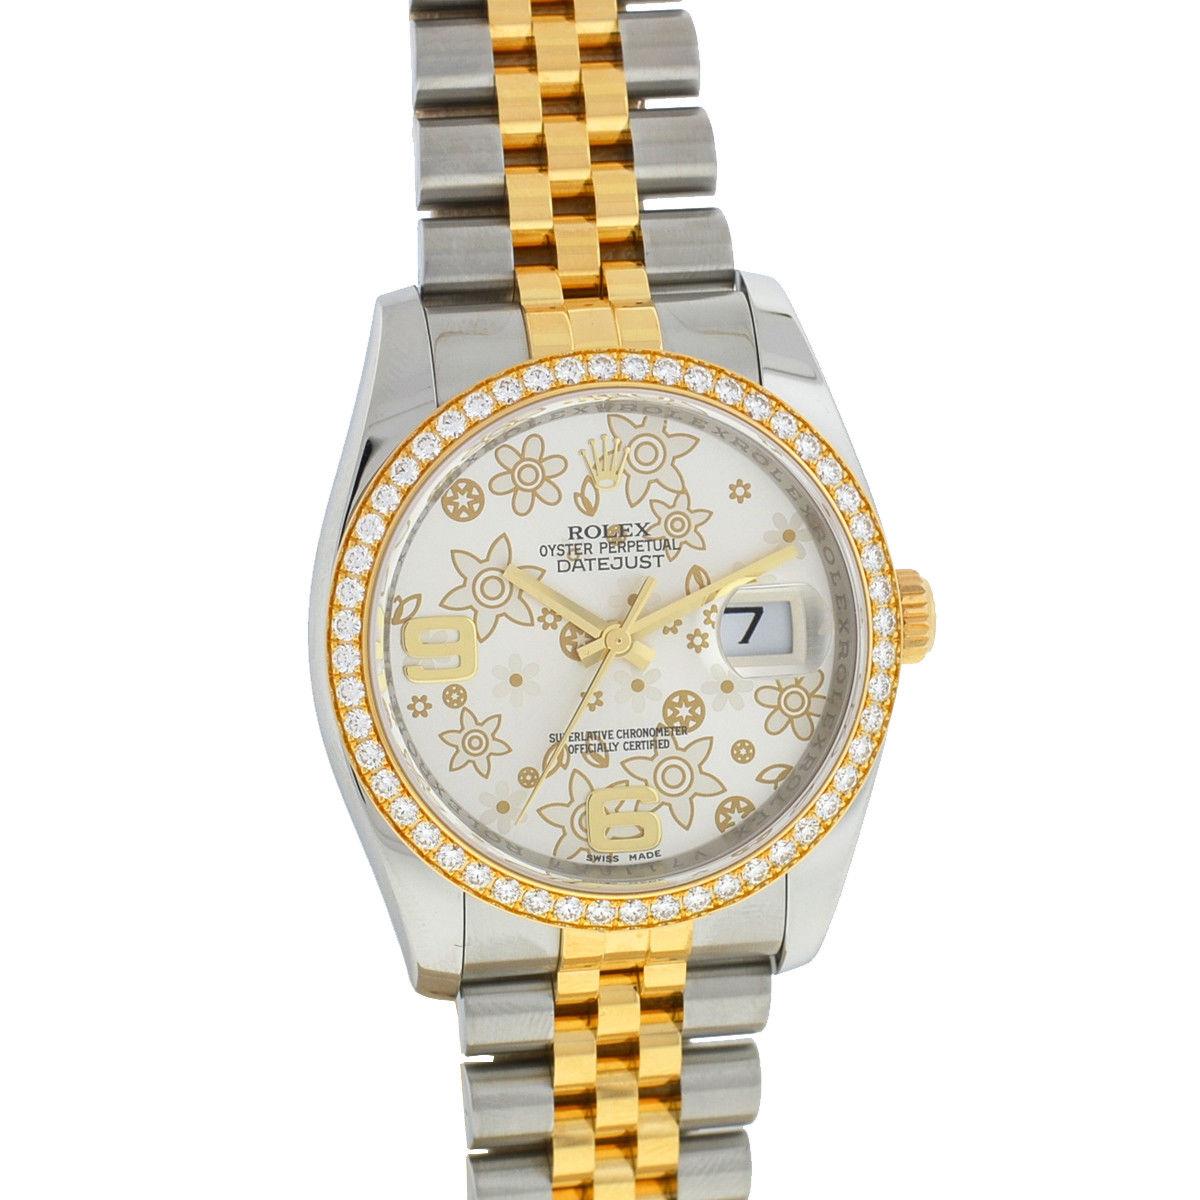 Company-Rolex
Style-Dress/Formal
Model-Datejust
Reference Number-116243
Case Metal-Stainless Steel 
Case Measurement-36 mm 
Bracelet-18k Yellow Gold / Stainless Steel (Comes with Extra links)
Dial-Silver Flower Dial 
Bezel-Diamond 18k Yellow Gold